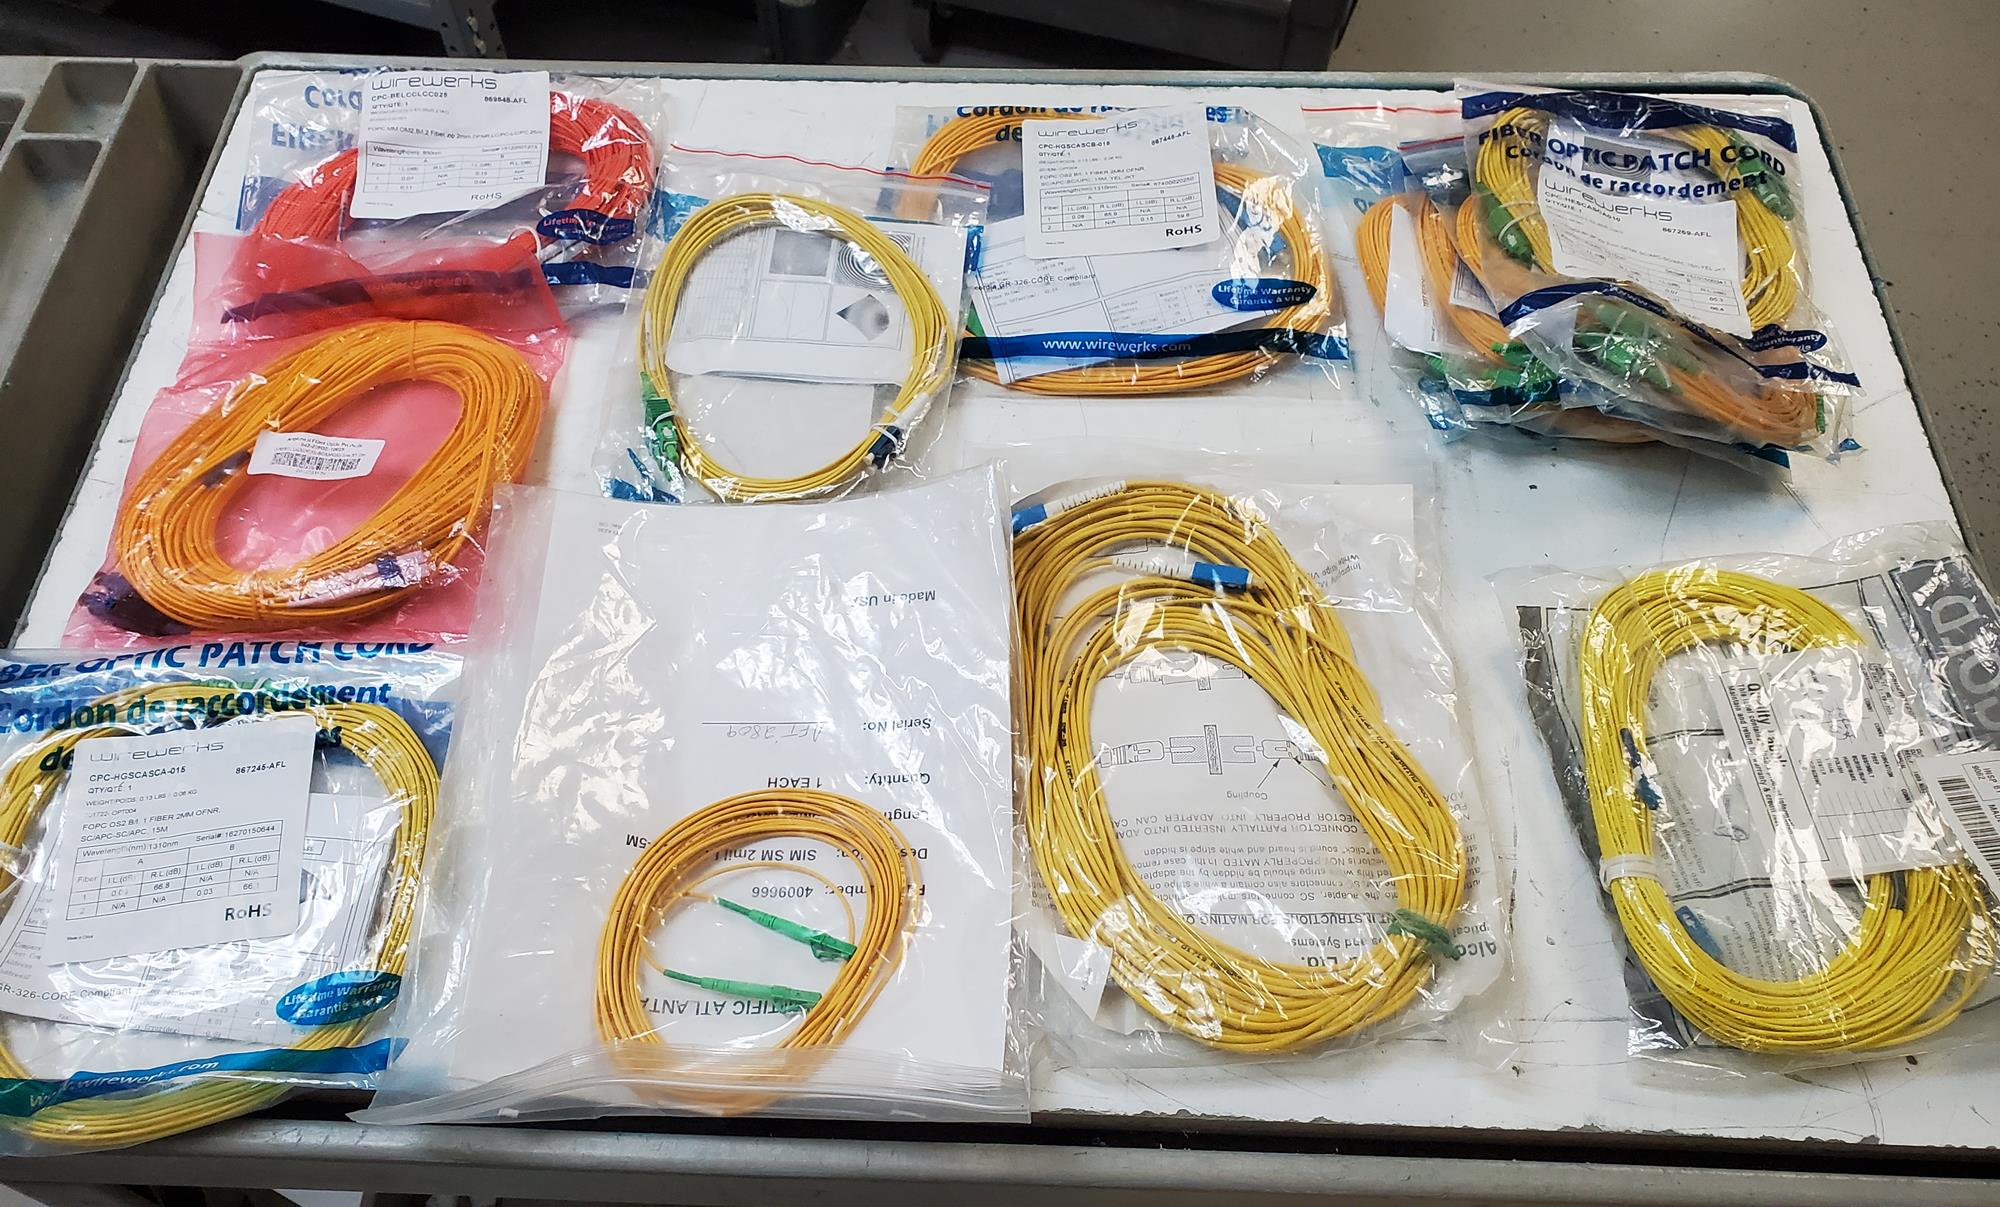 AccuSource patchcord mixed lot just arrived